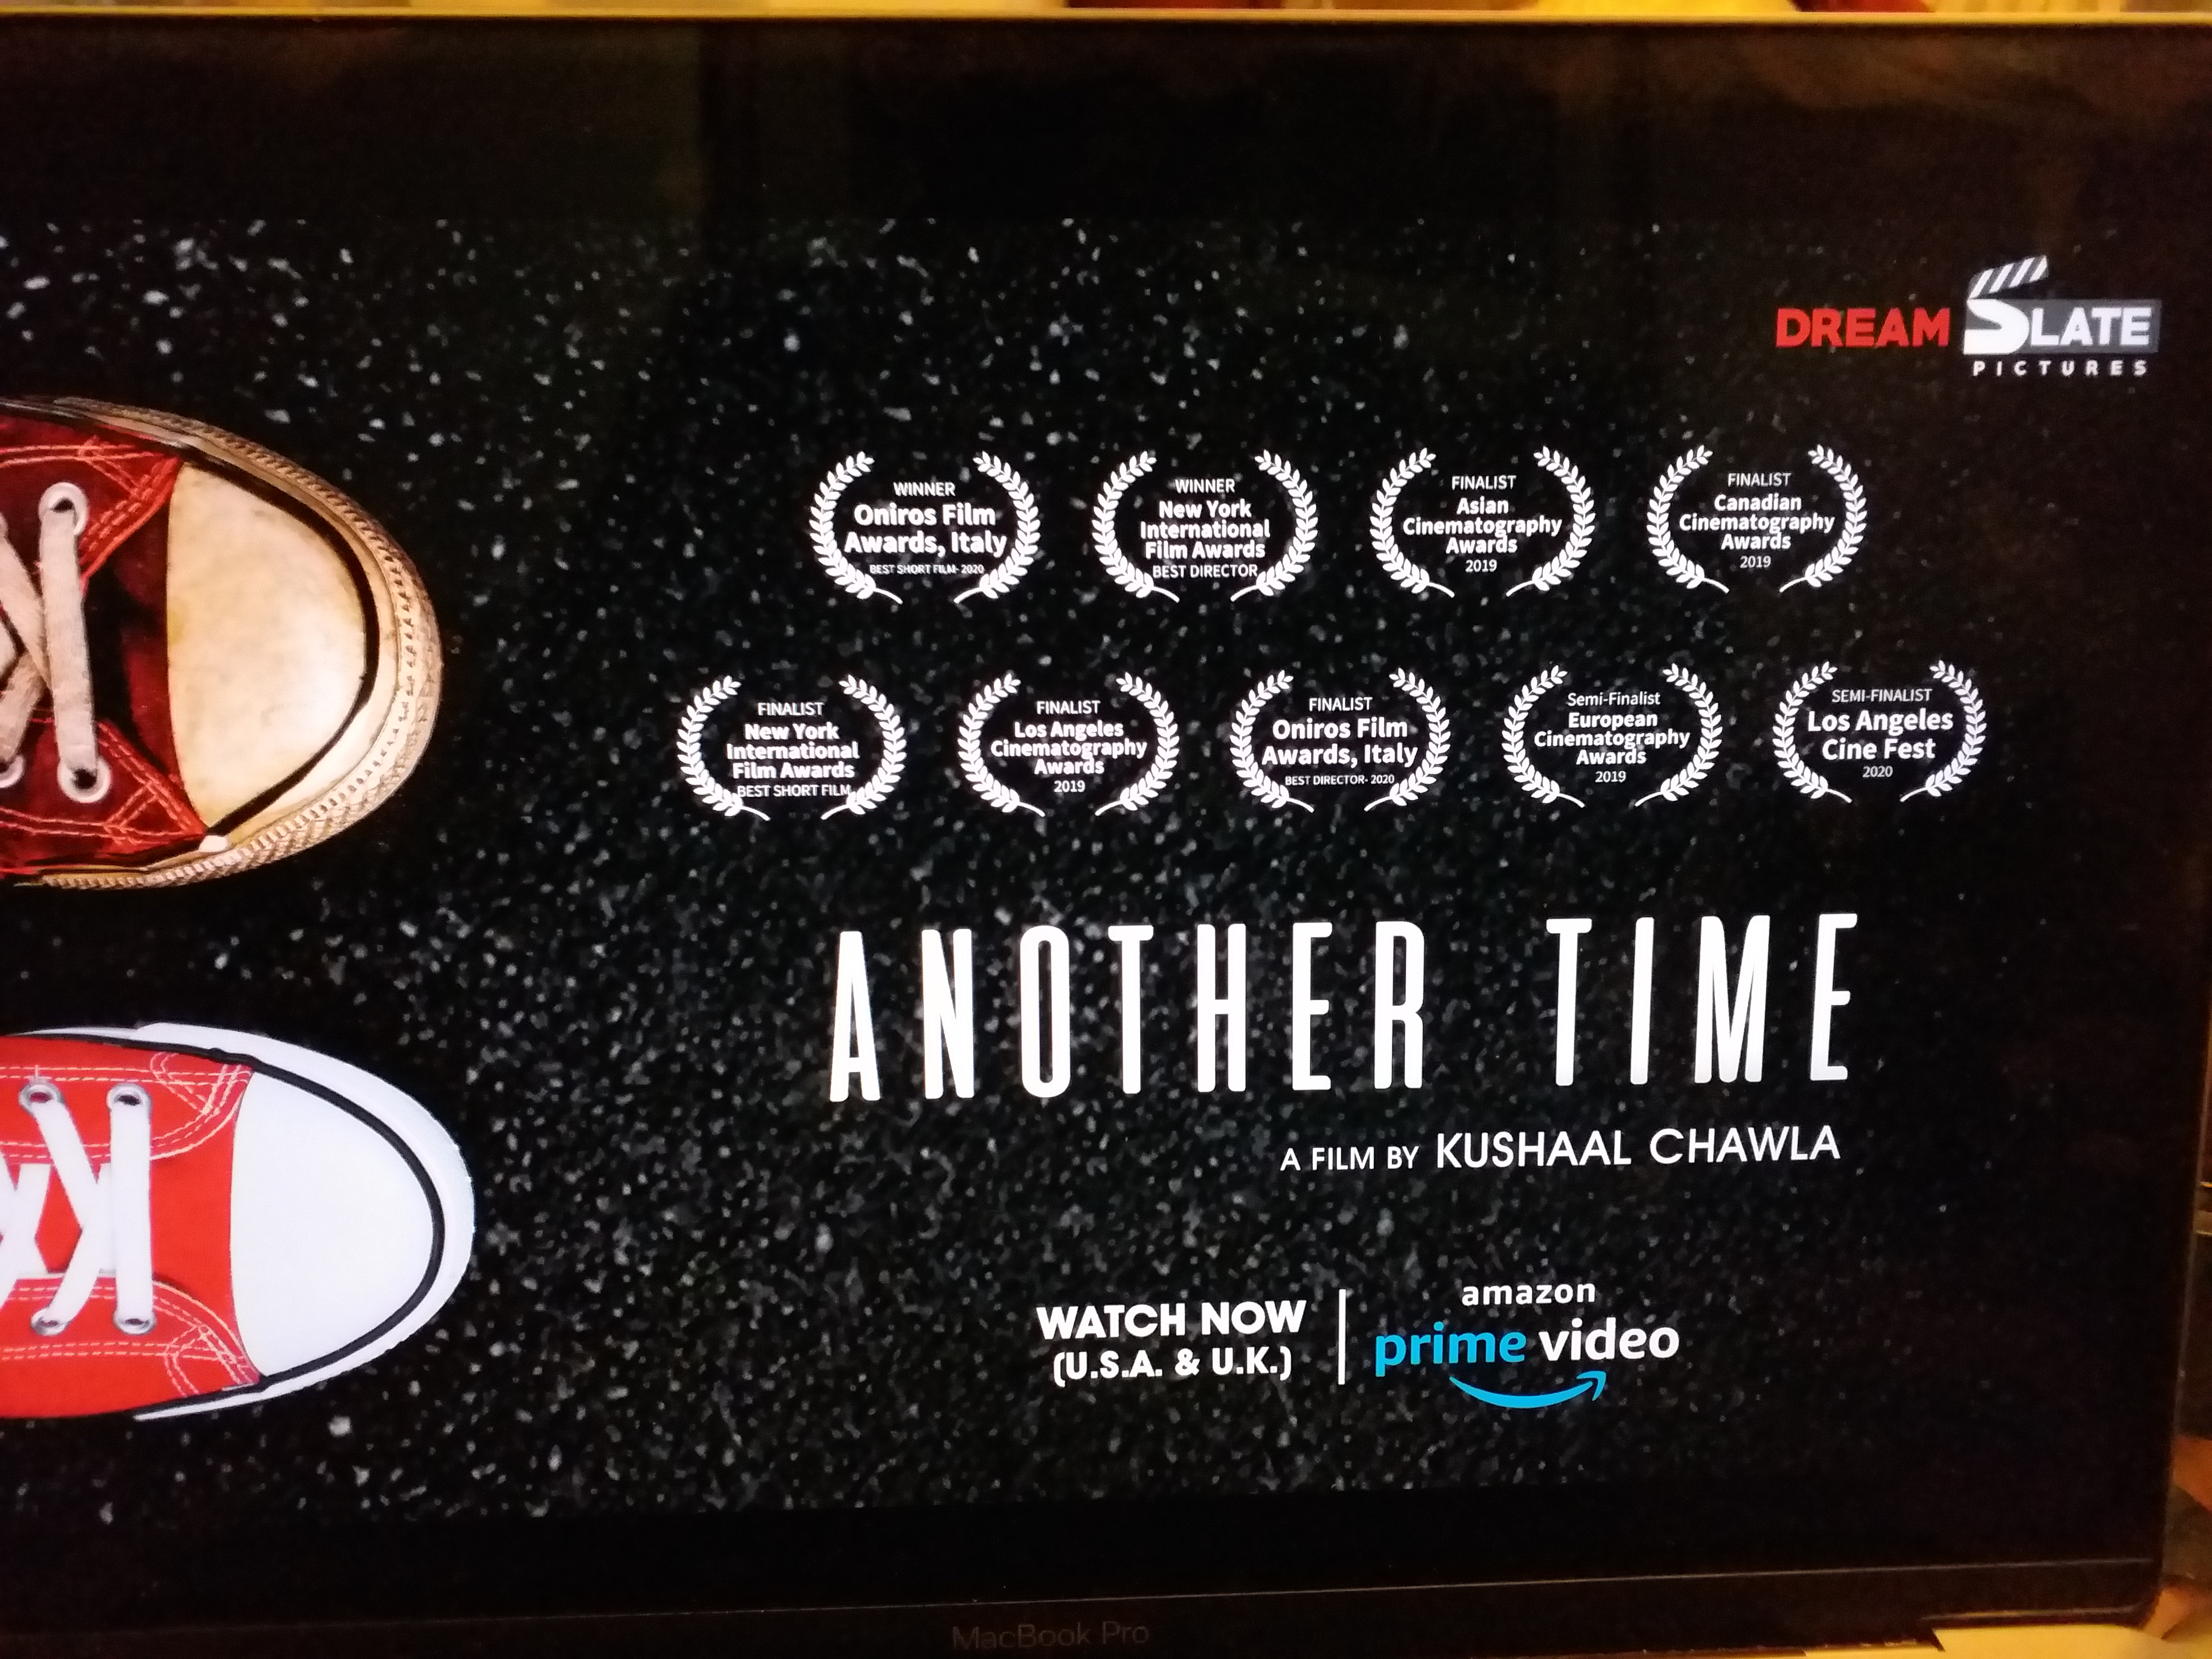 another time short film win 12 awards